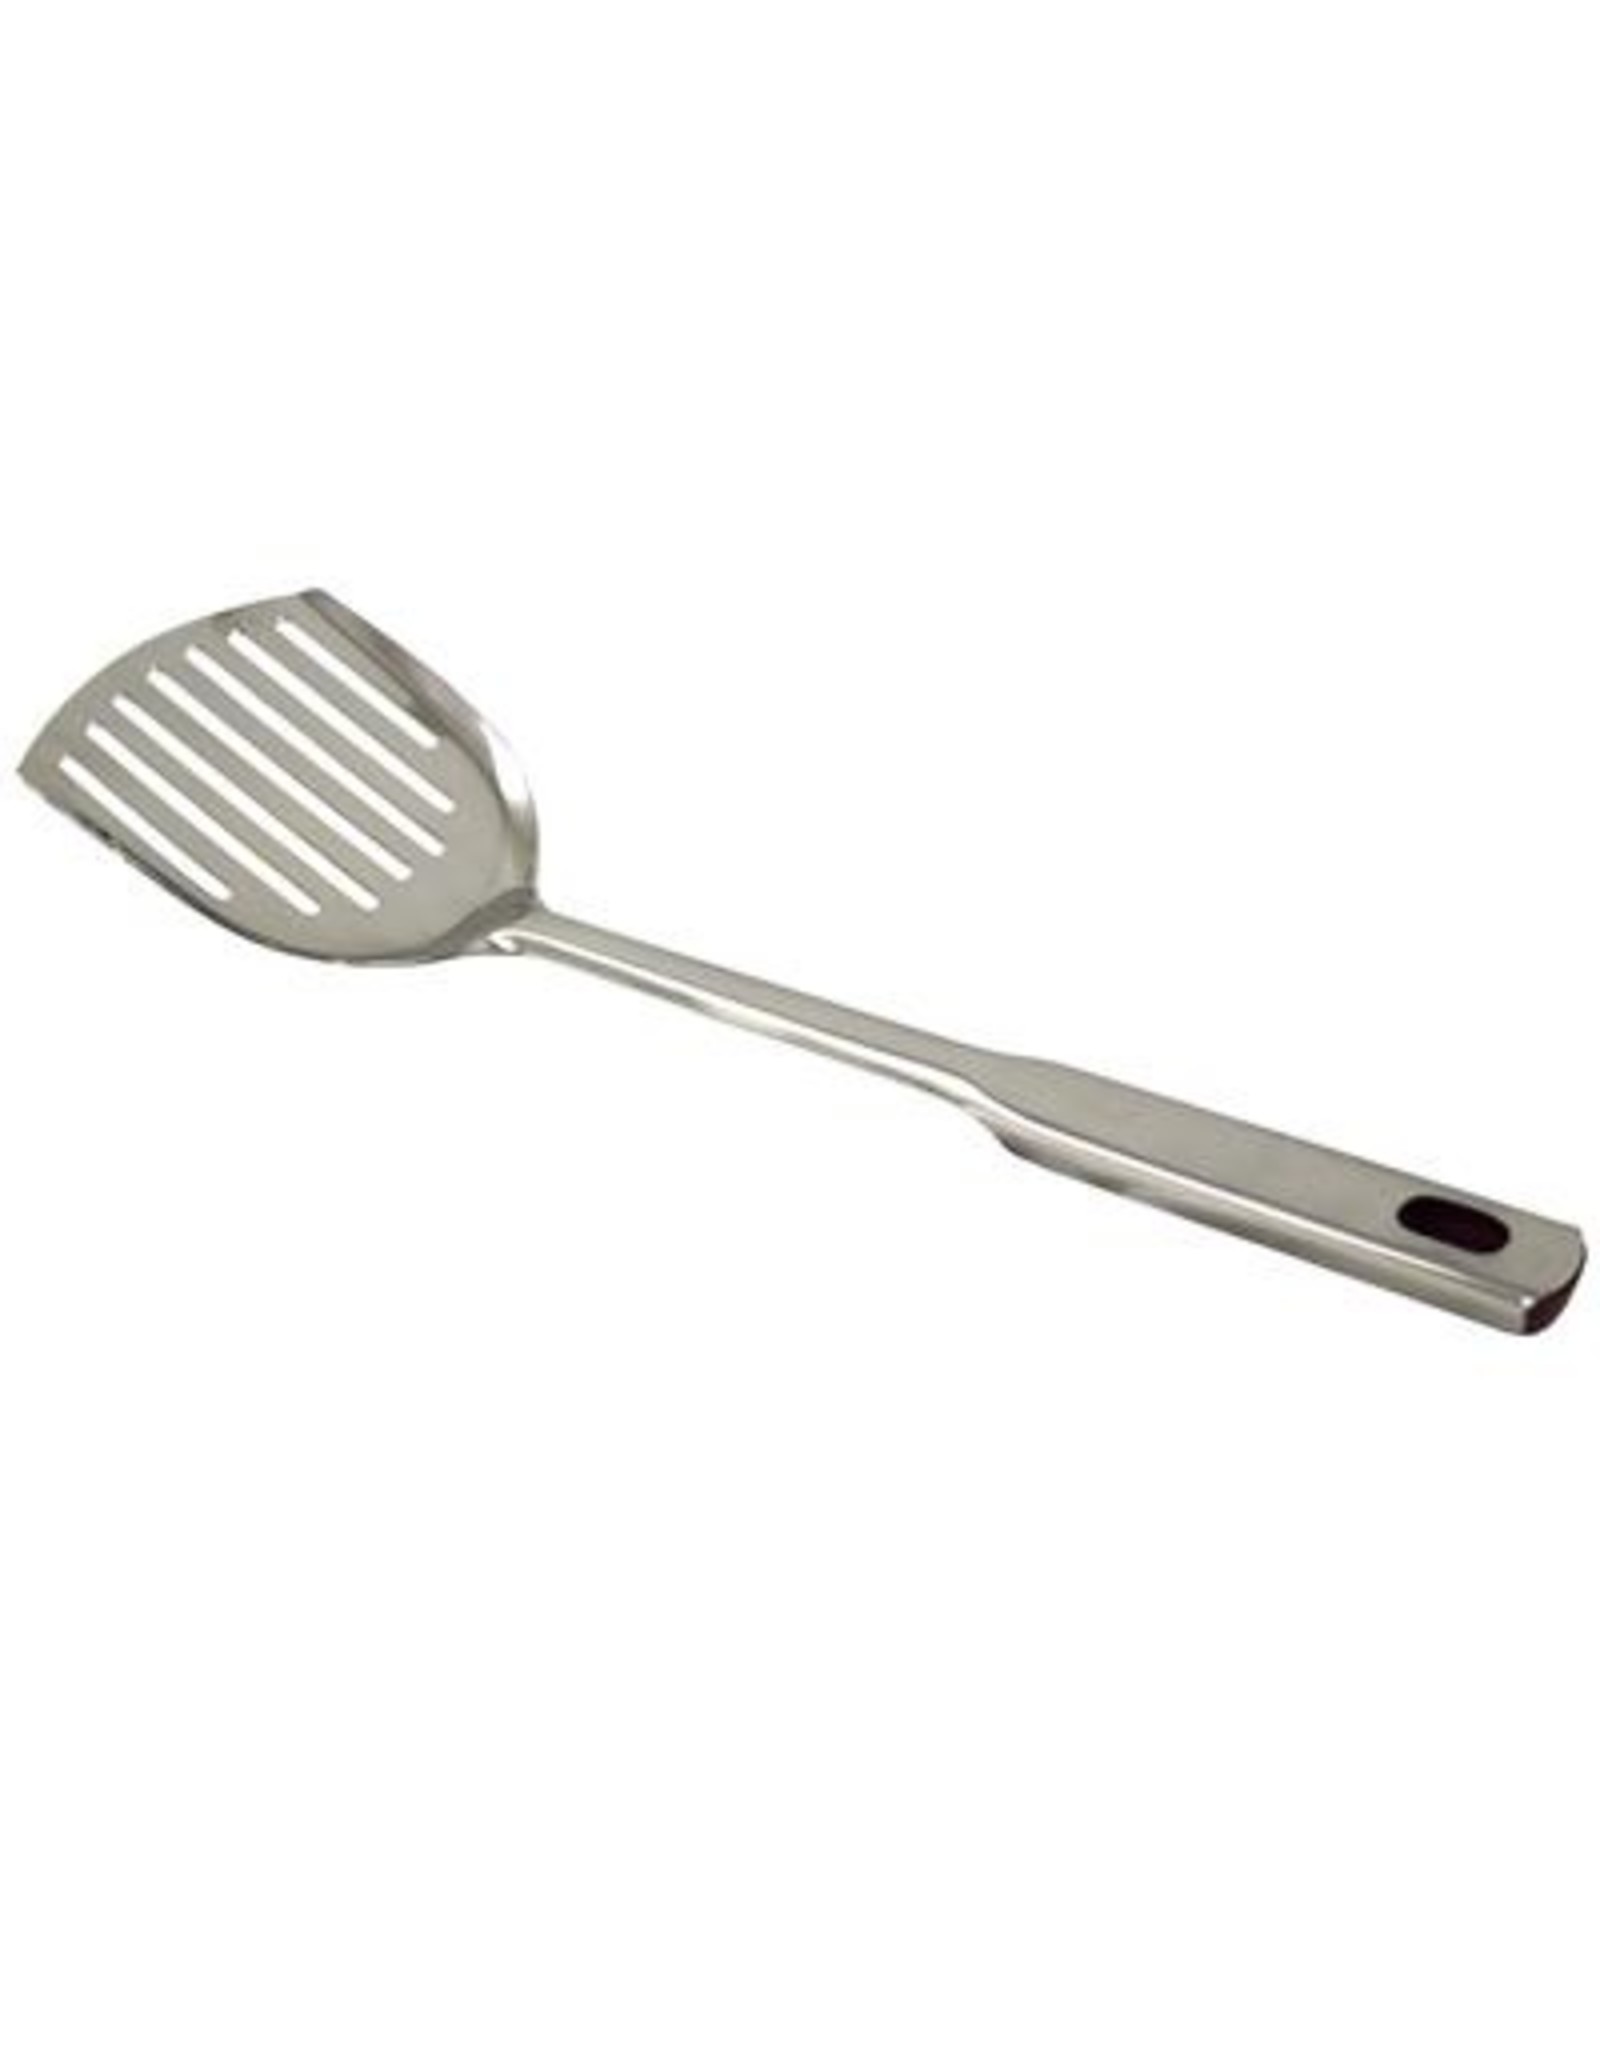 Unleashed Stainless Steel Slotted Litter Scoop